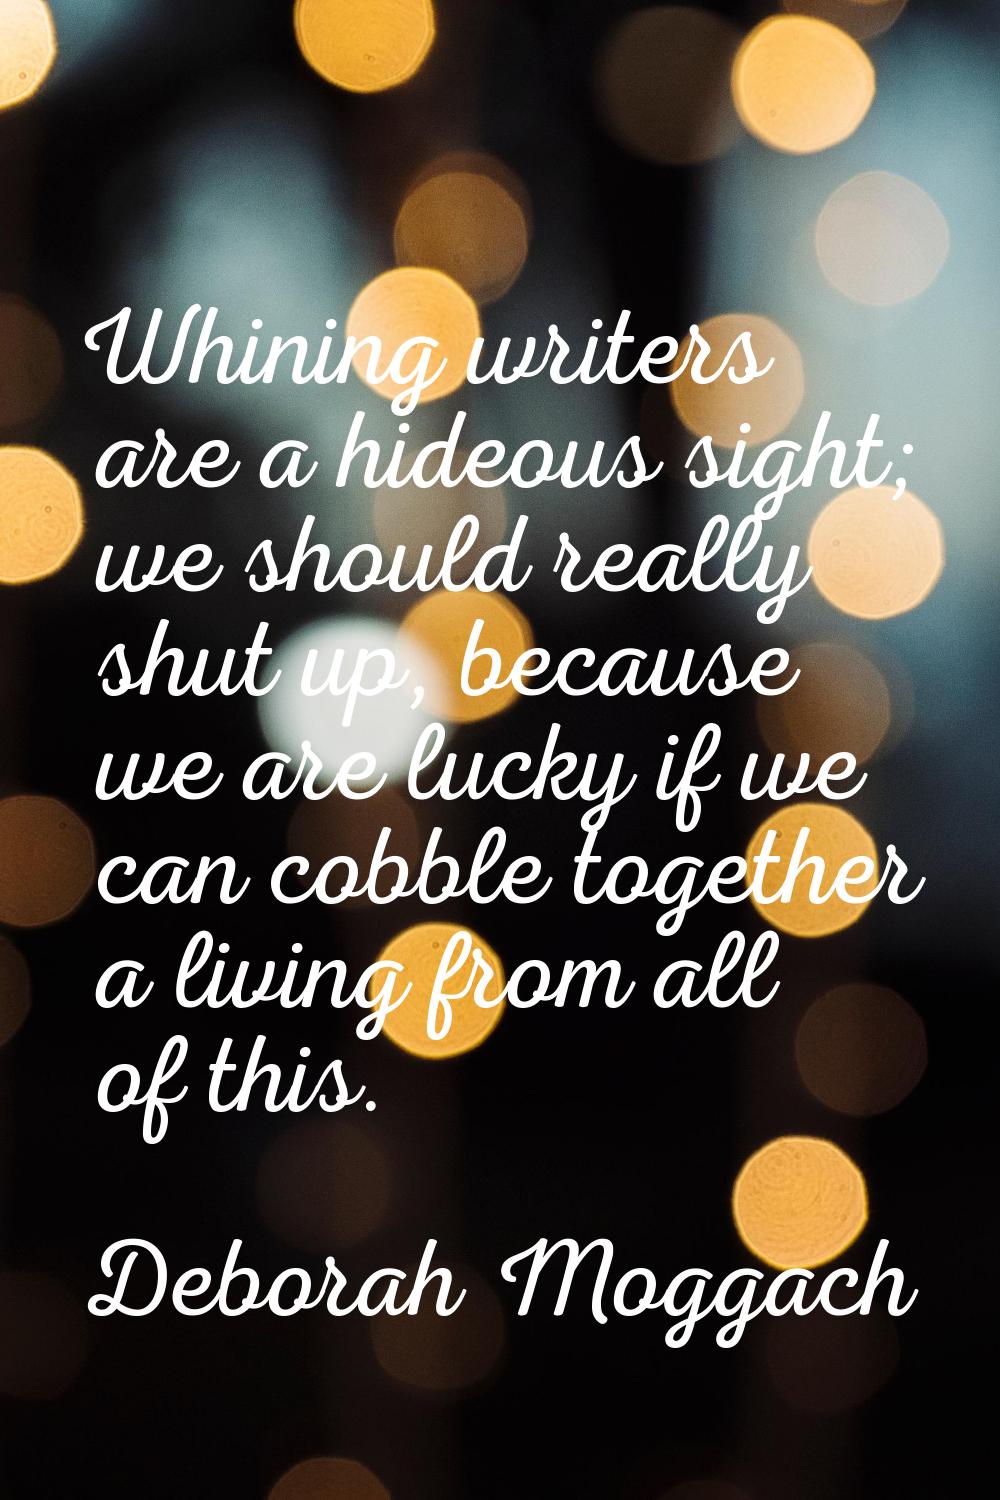 Whining writers are a hideous sight; we should really shut up, because we are lucky if we can cobbl